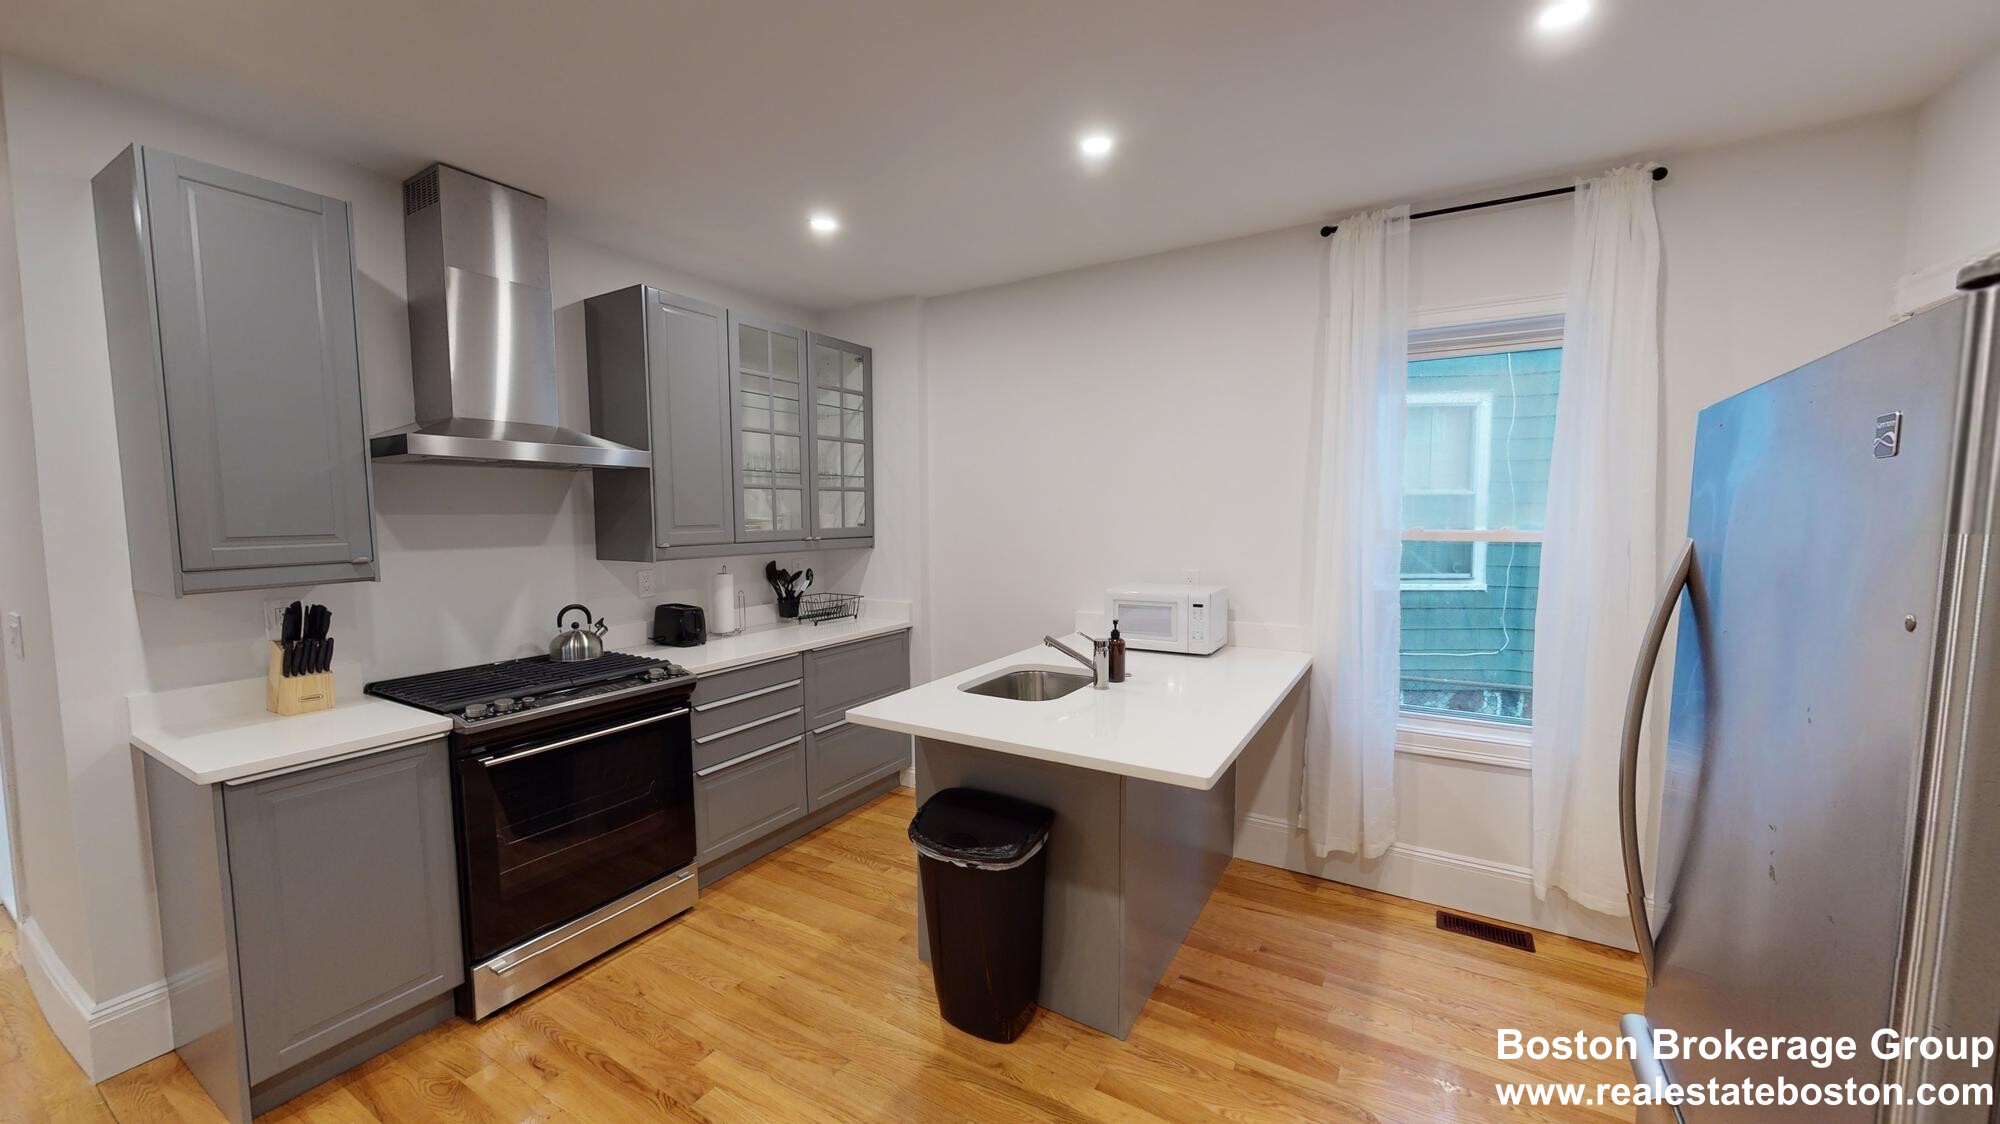 Photos of apartment on Howes St.,Boston MA 02125